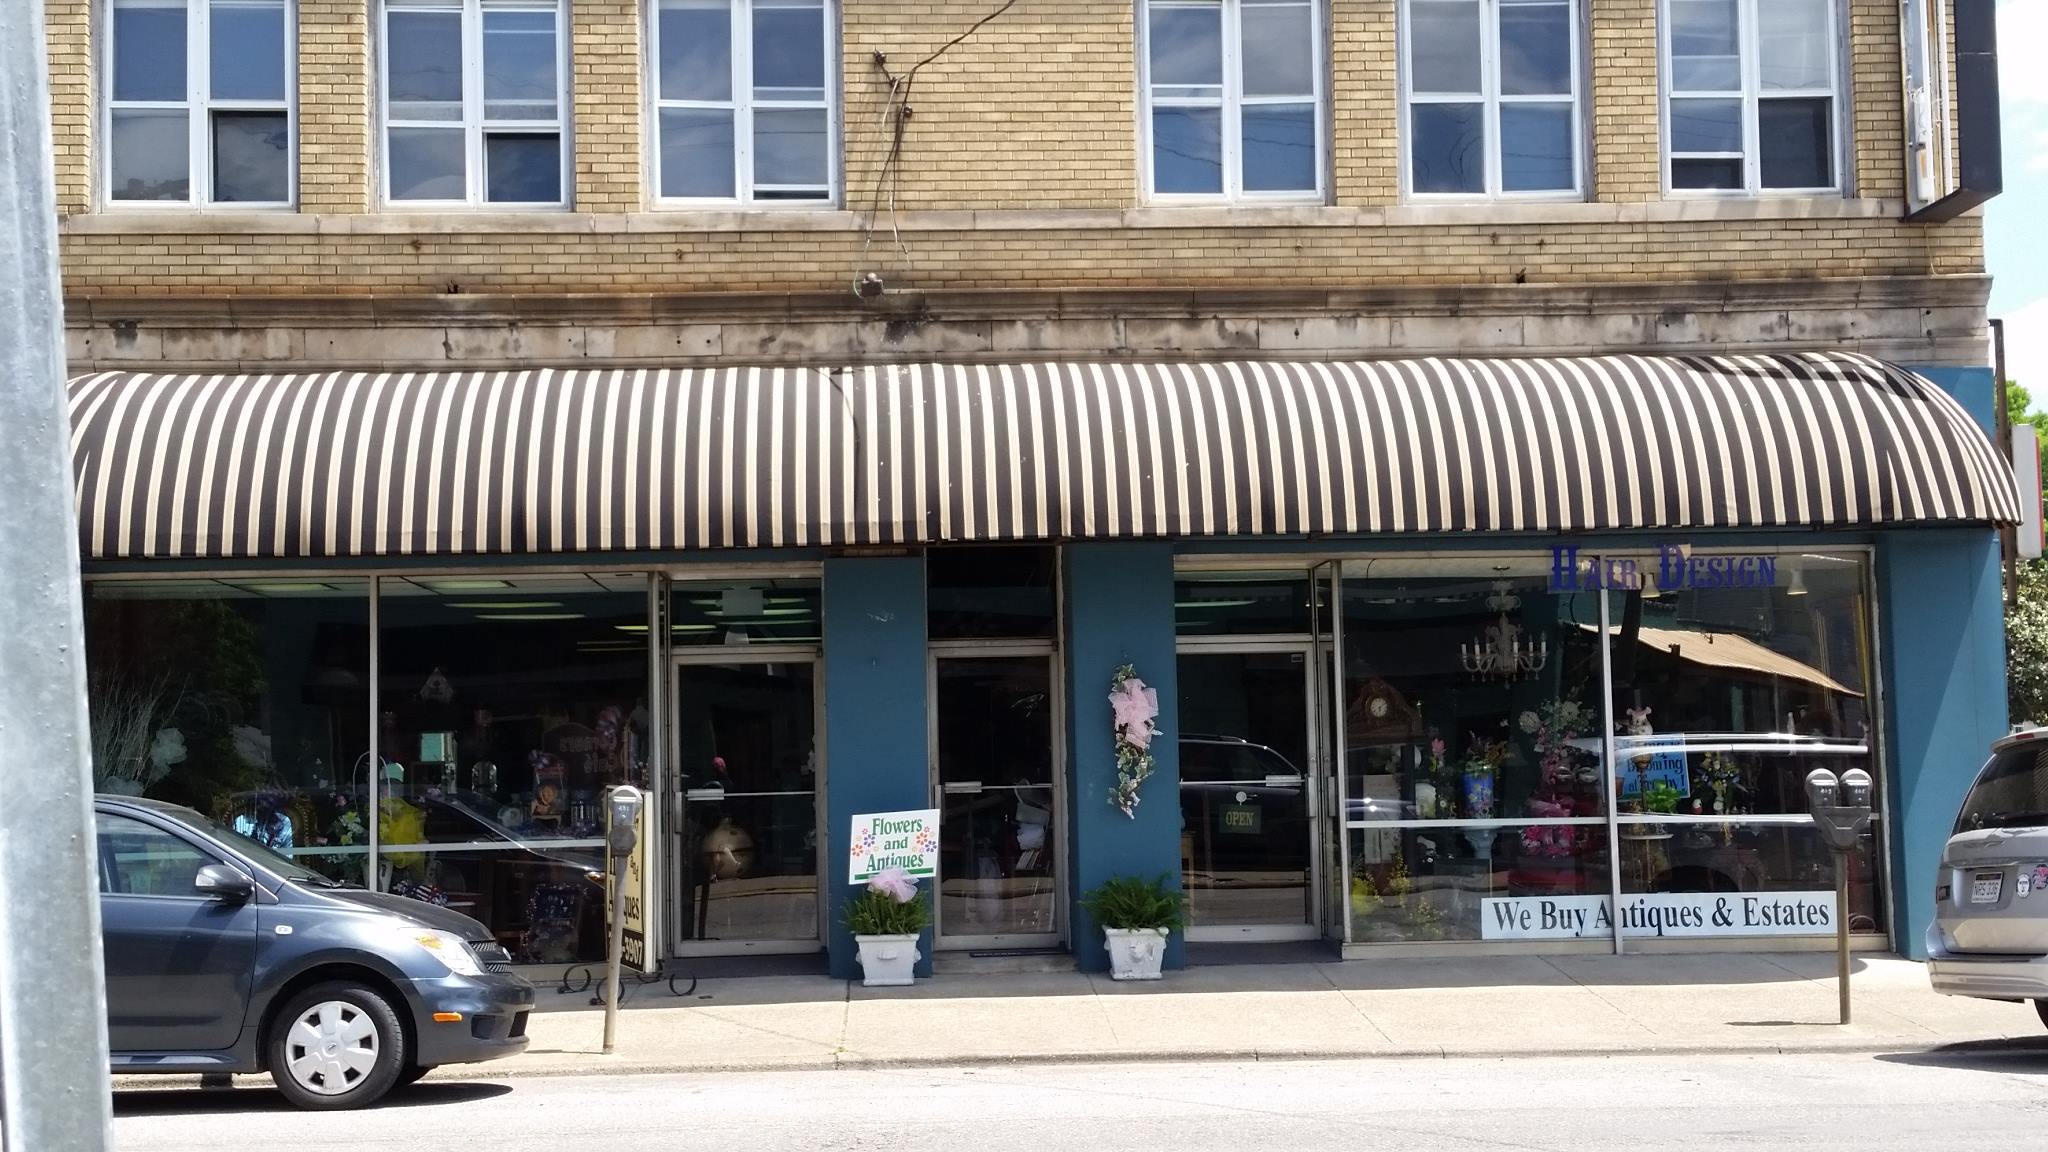 It’s Too Hard To Decide Which Of These 3 Antique Shops In Charleston, West Virginia Is The Best